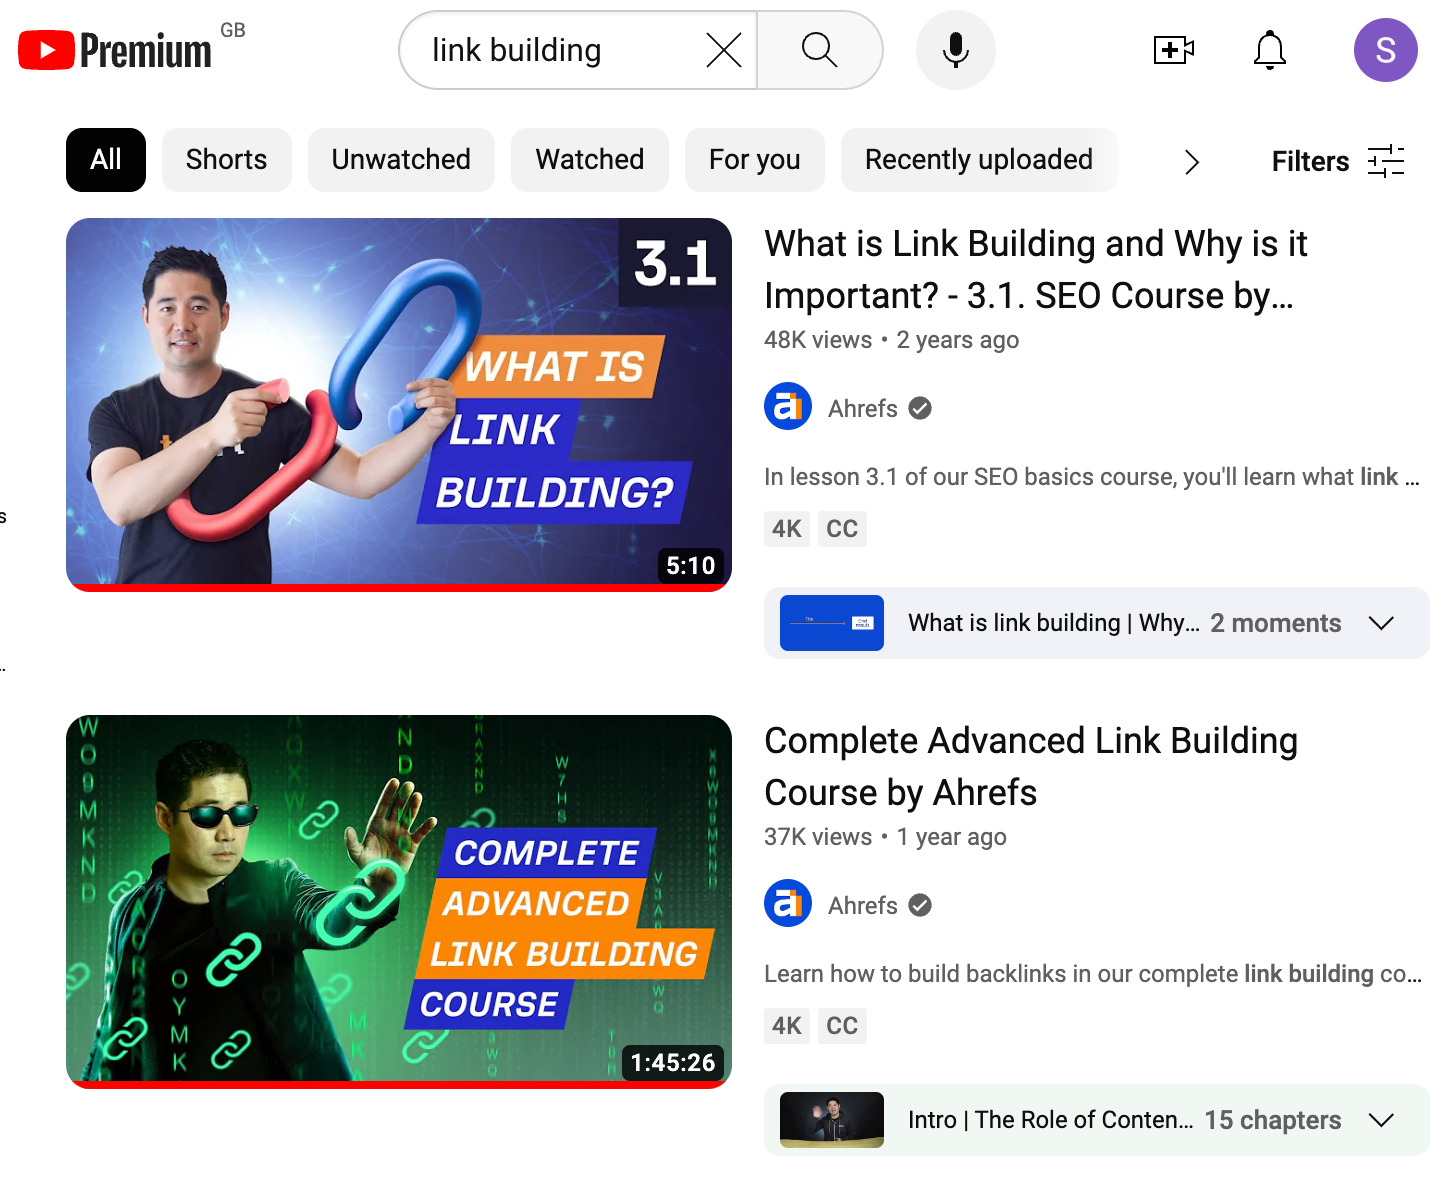 Ahrefs' link building videos rank #1 for the term "link building"
